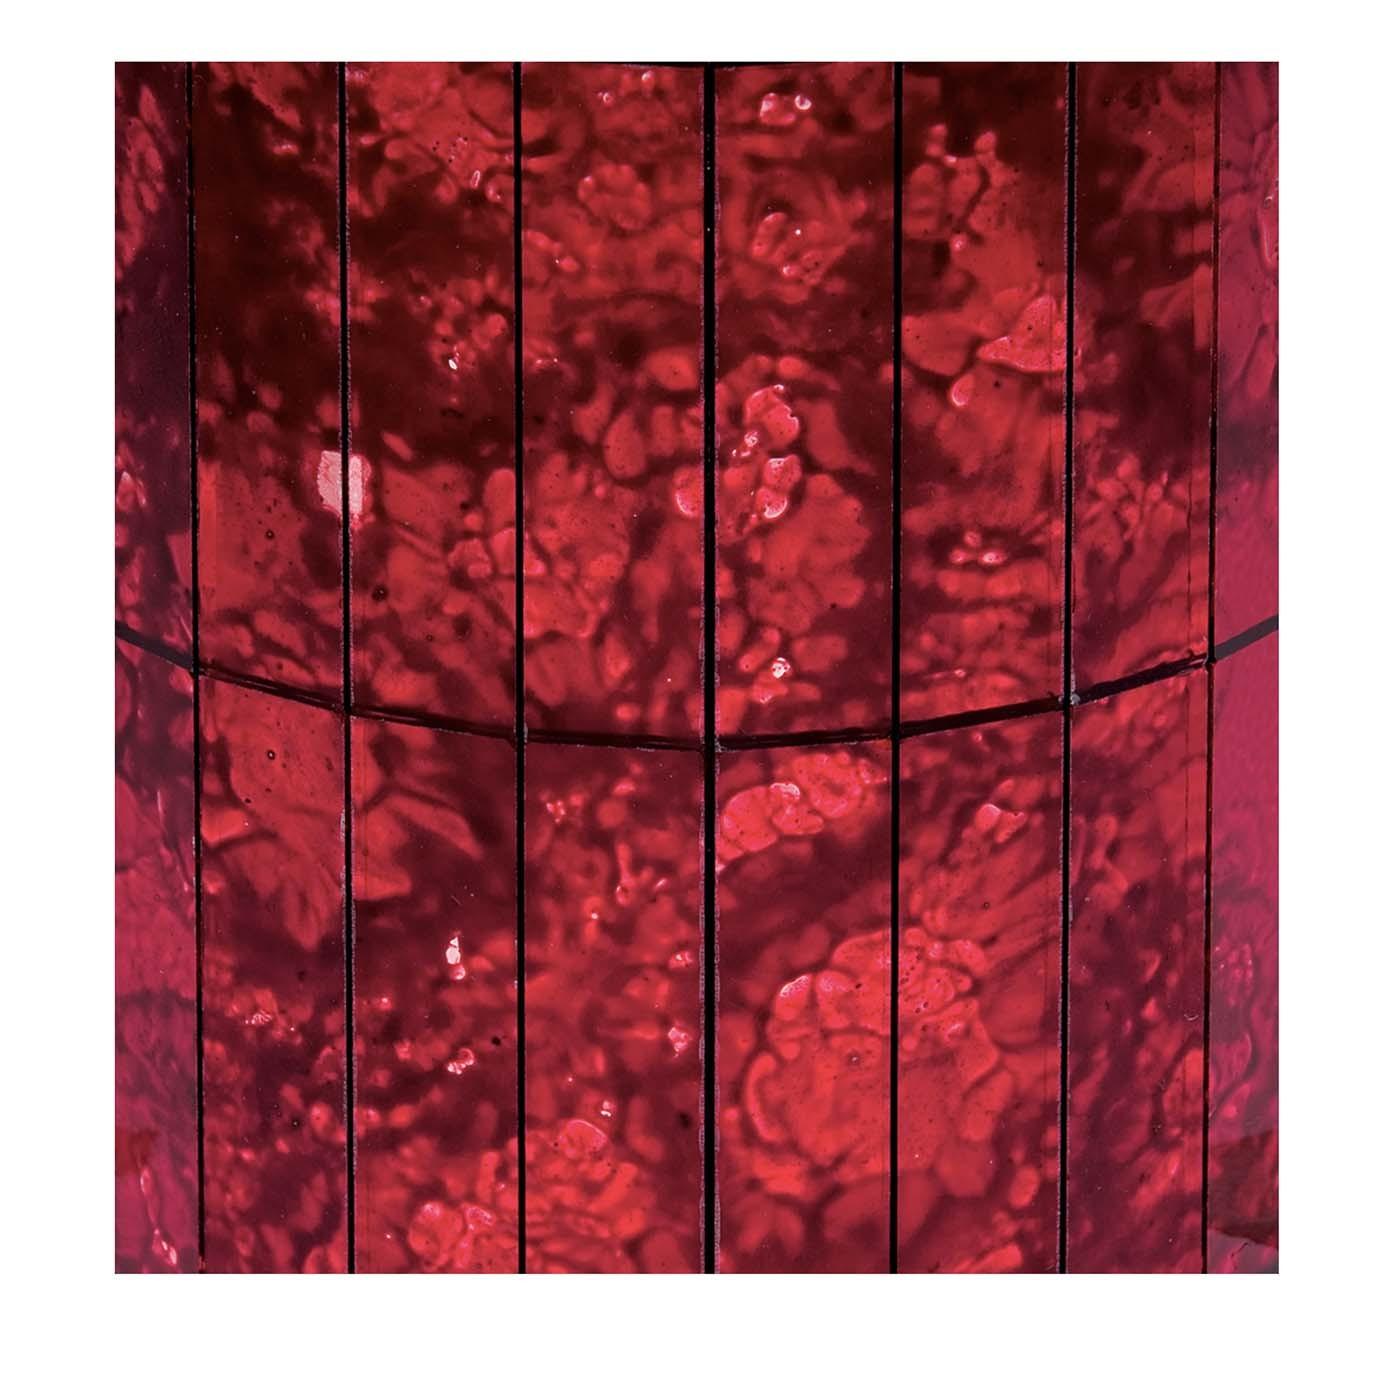 Antique Mirror has hit the mark with the striking shades of red on these canvased mosaic glass panels. The tones from light to ruby to dark red are dramatic and powerful and create an emotionally vivid atmosphere in any room in a modern home. Each